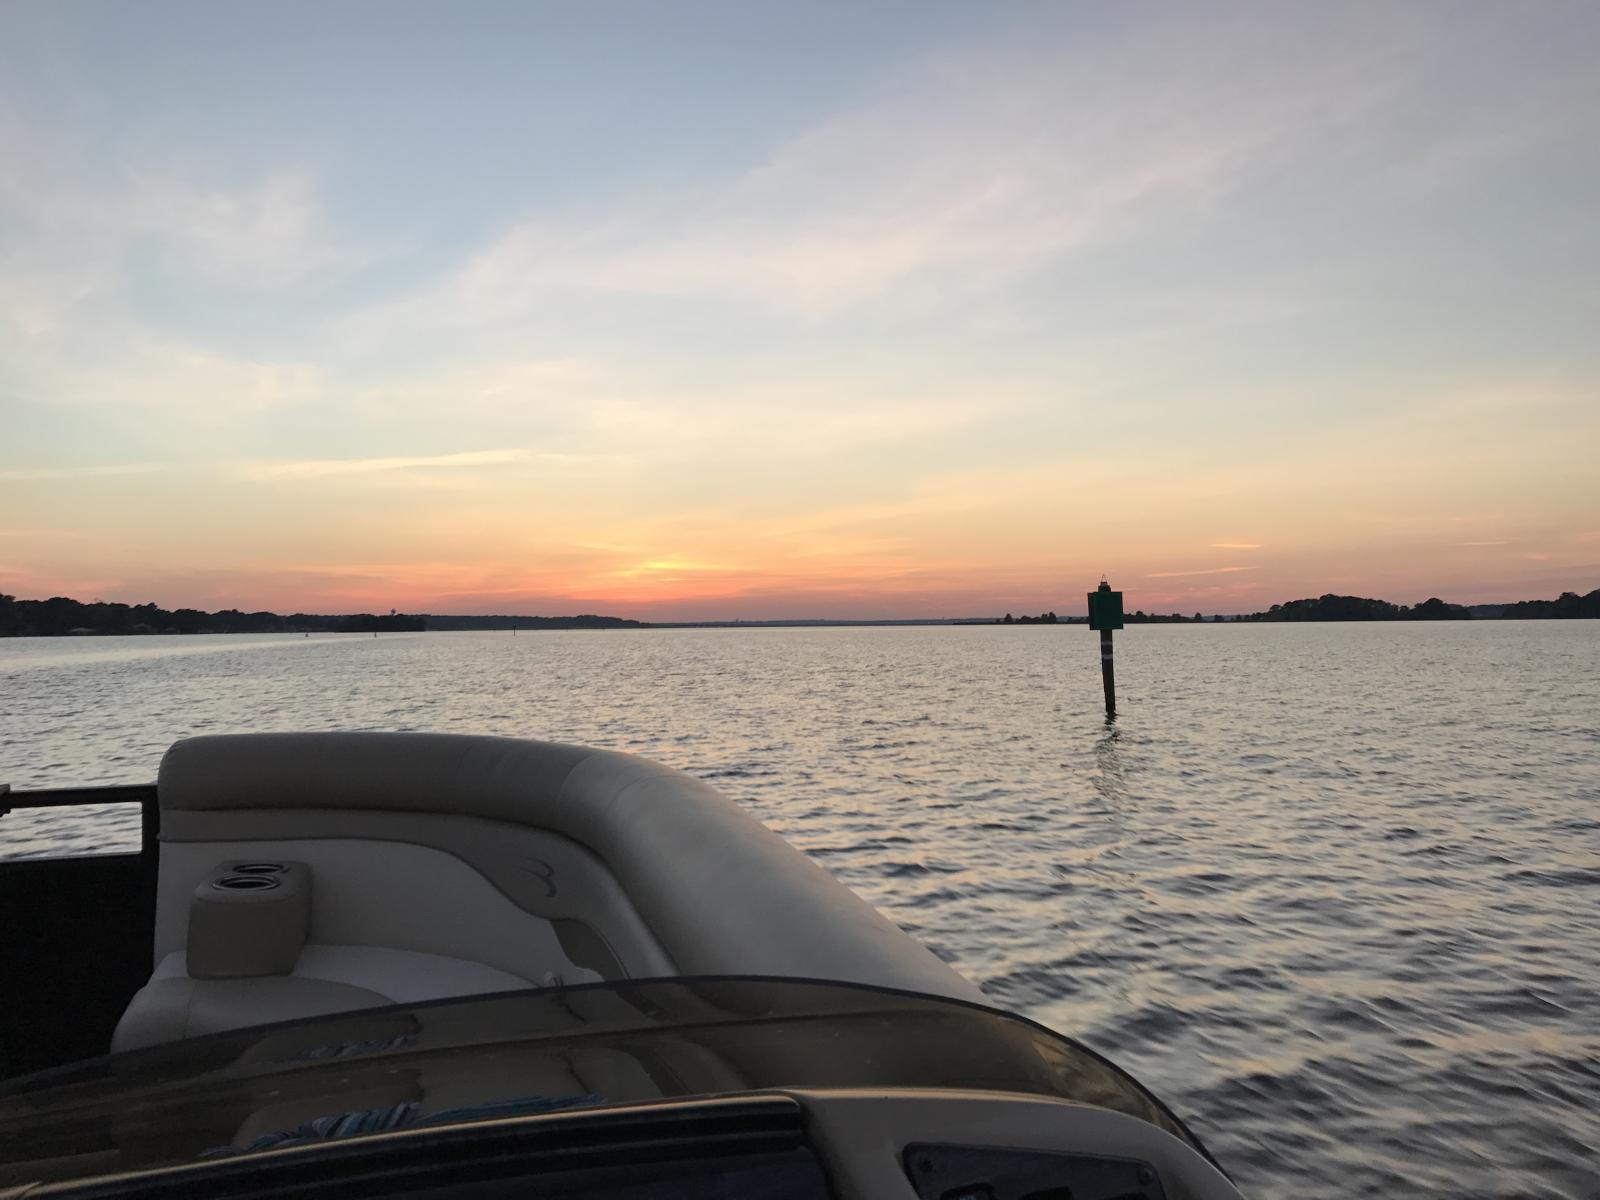 Our Thursday evening sunset cruise.